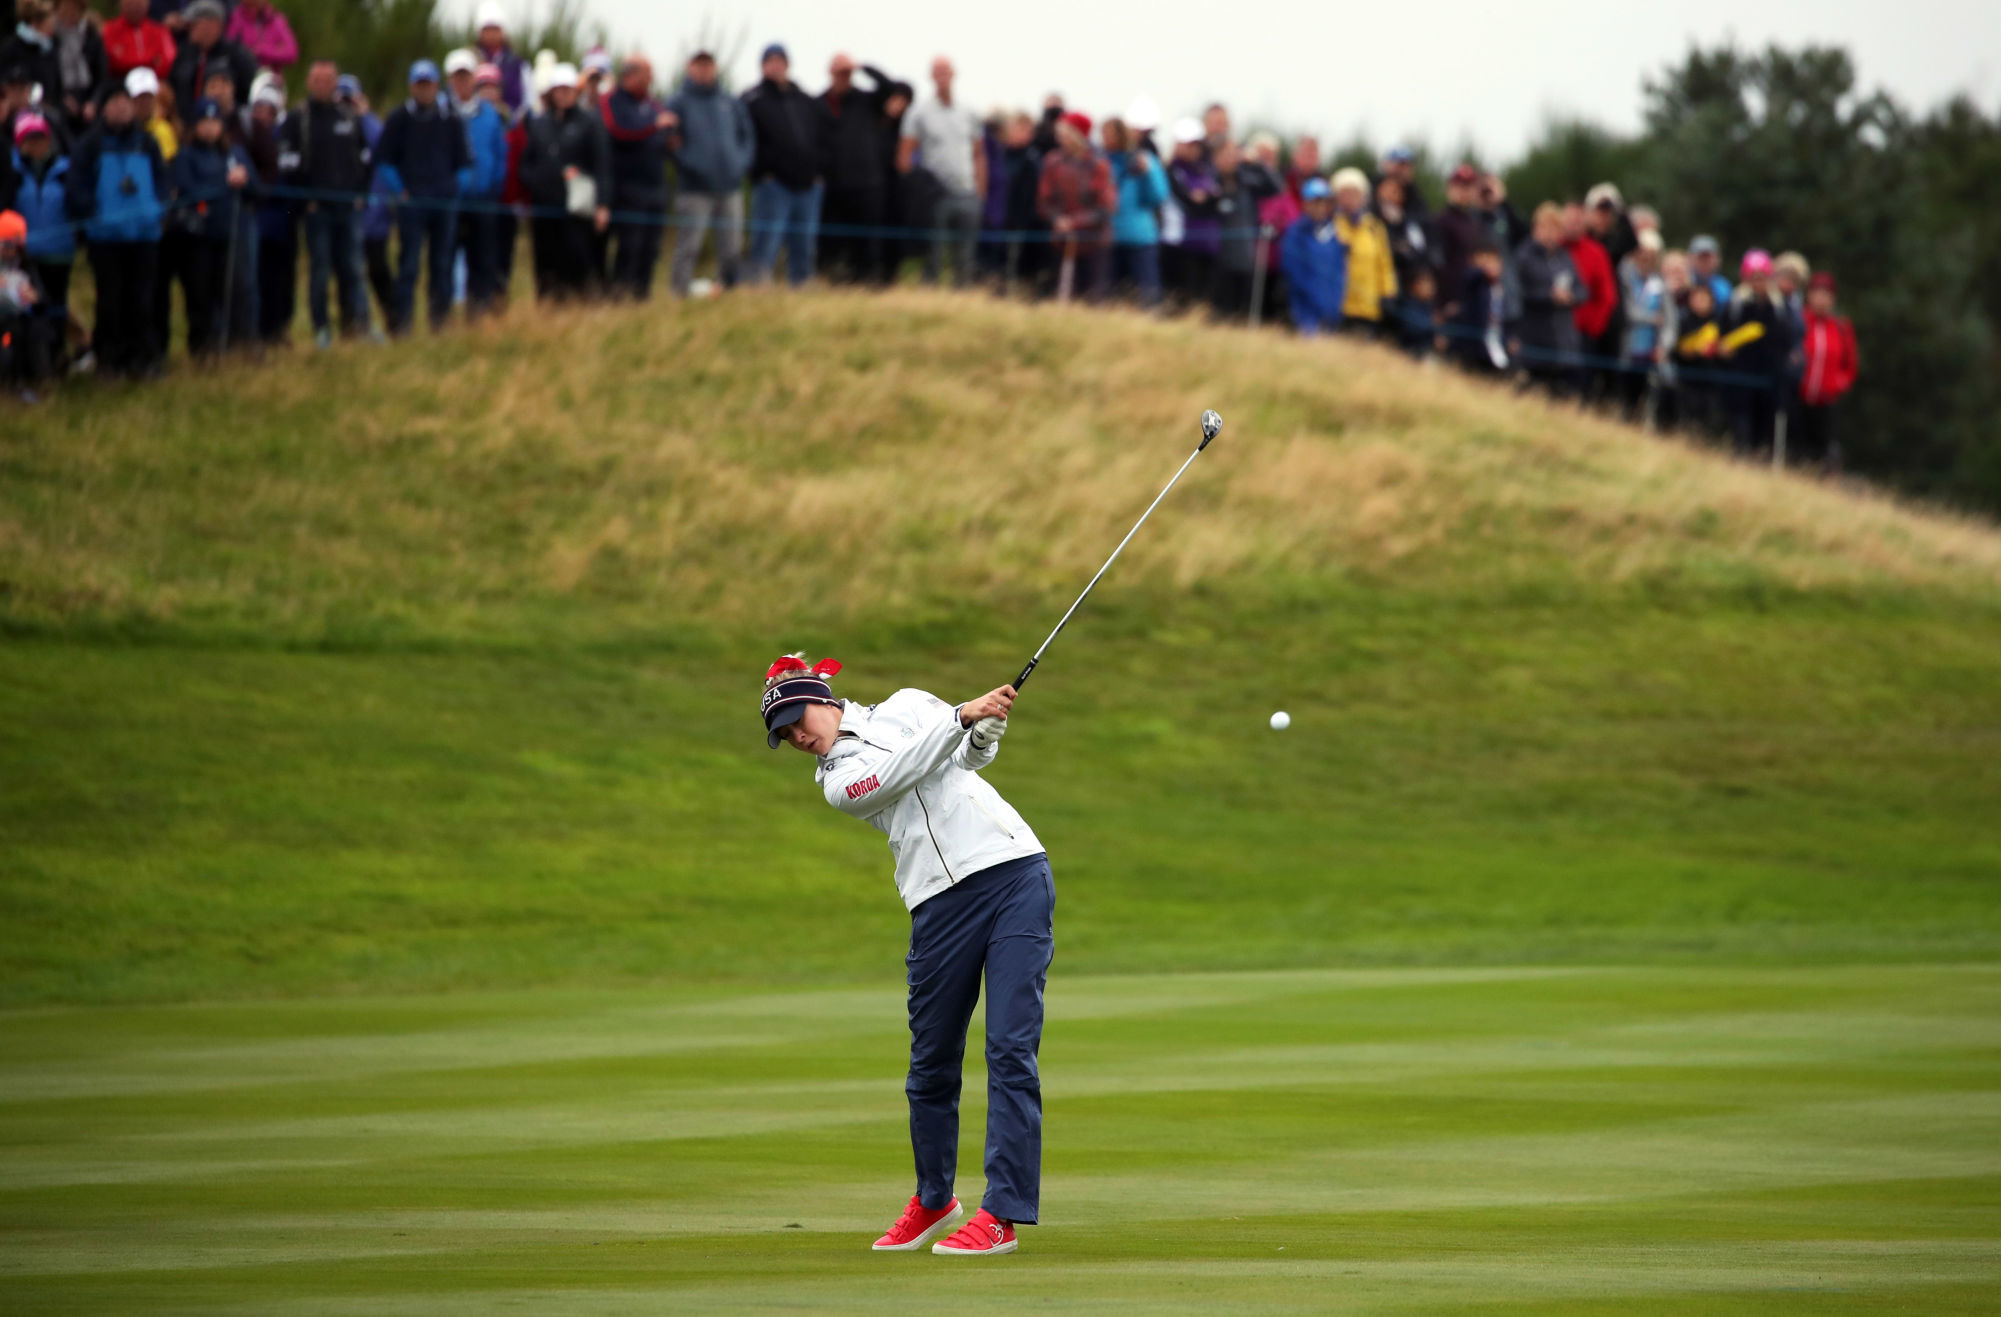 Team USA's Nelly Korda on the 2nd during the Singles match on day three of the 2019 Solheim Cup at Gleneagles Golf Club, Auchterarder. 

Photo by Icon Sport - Nelly KORDA - Gleneagles Golf Club - Auchterarder (Ecosse)